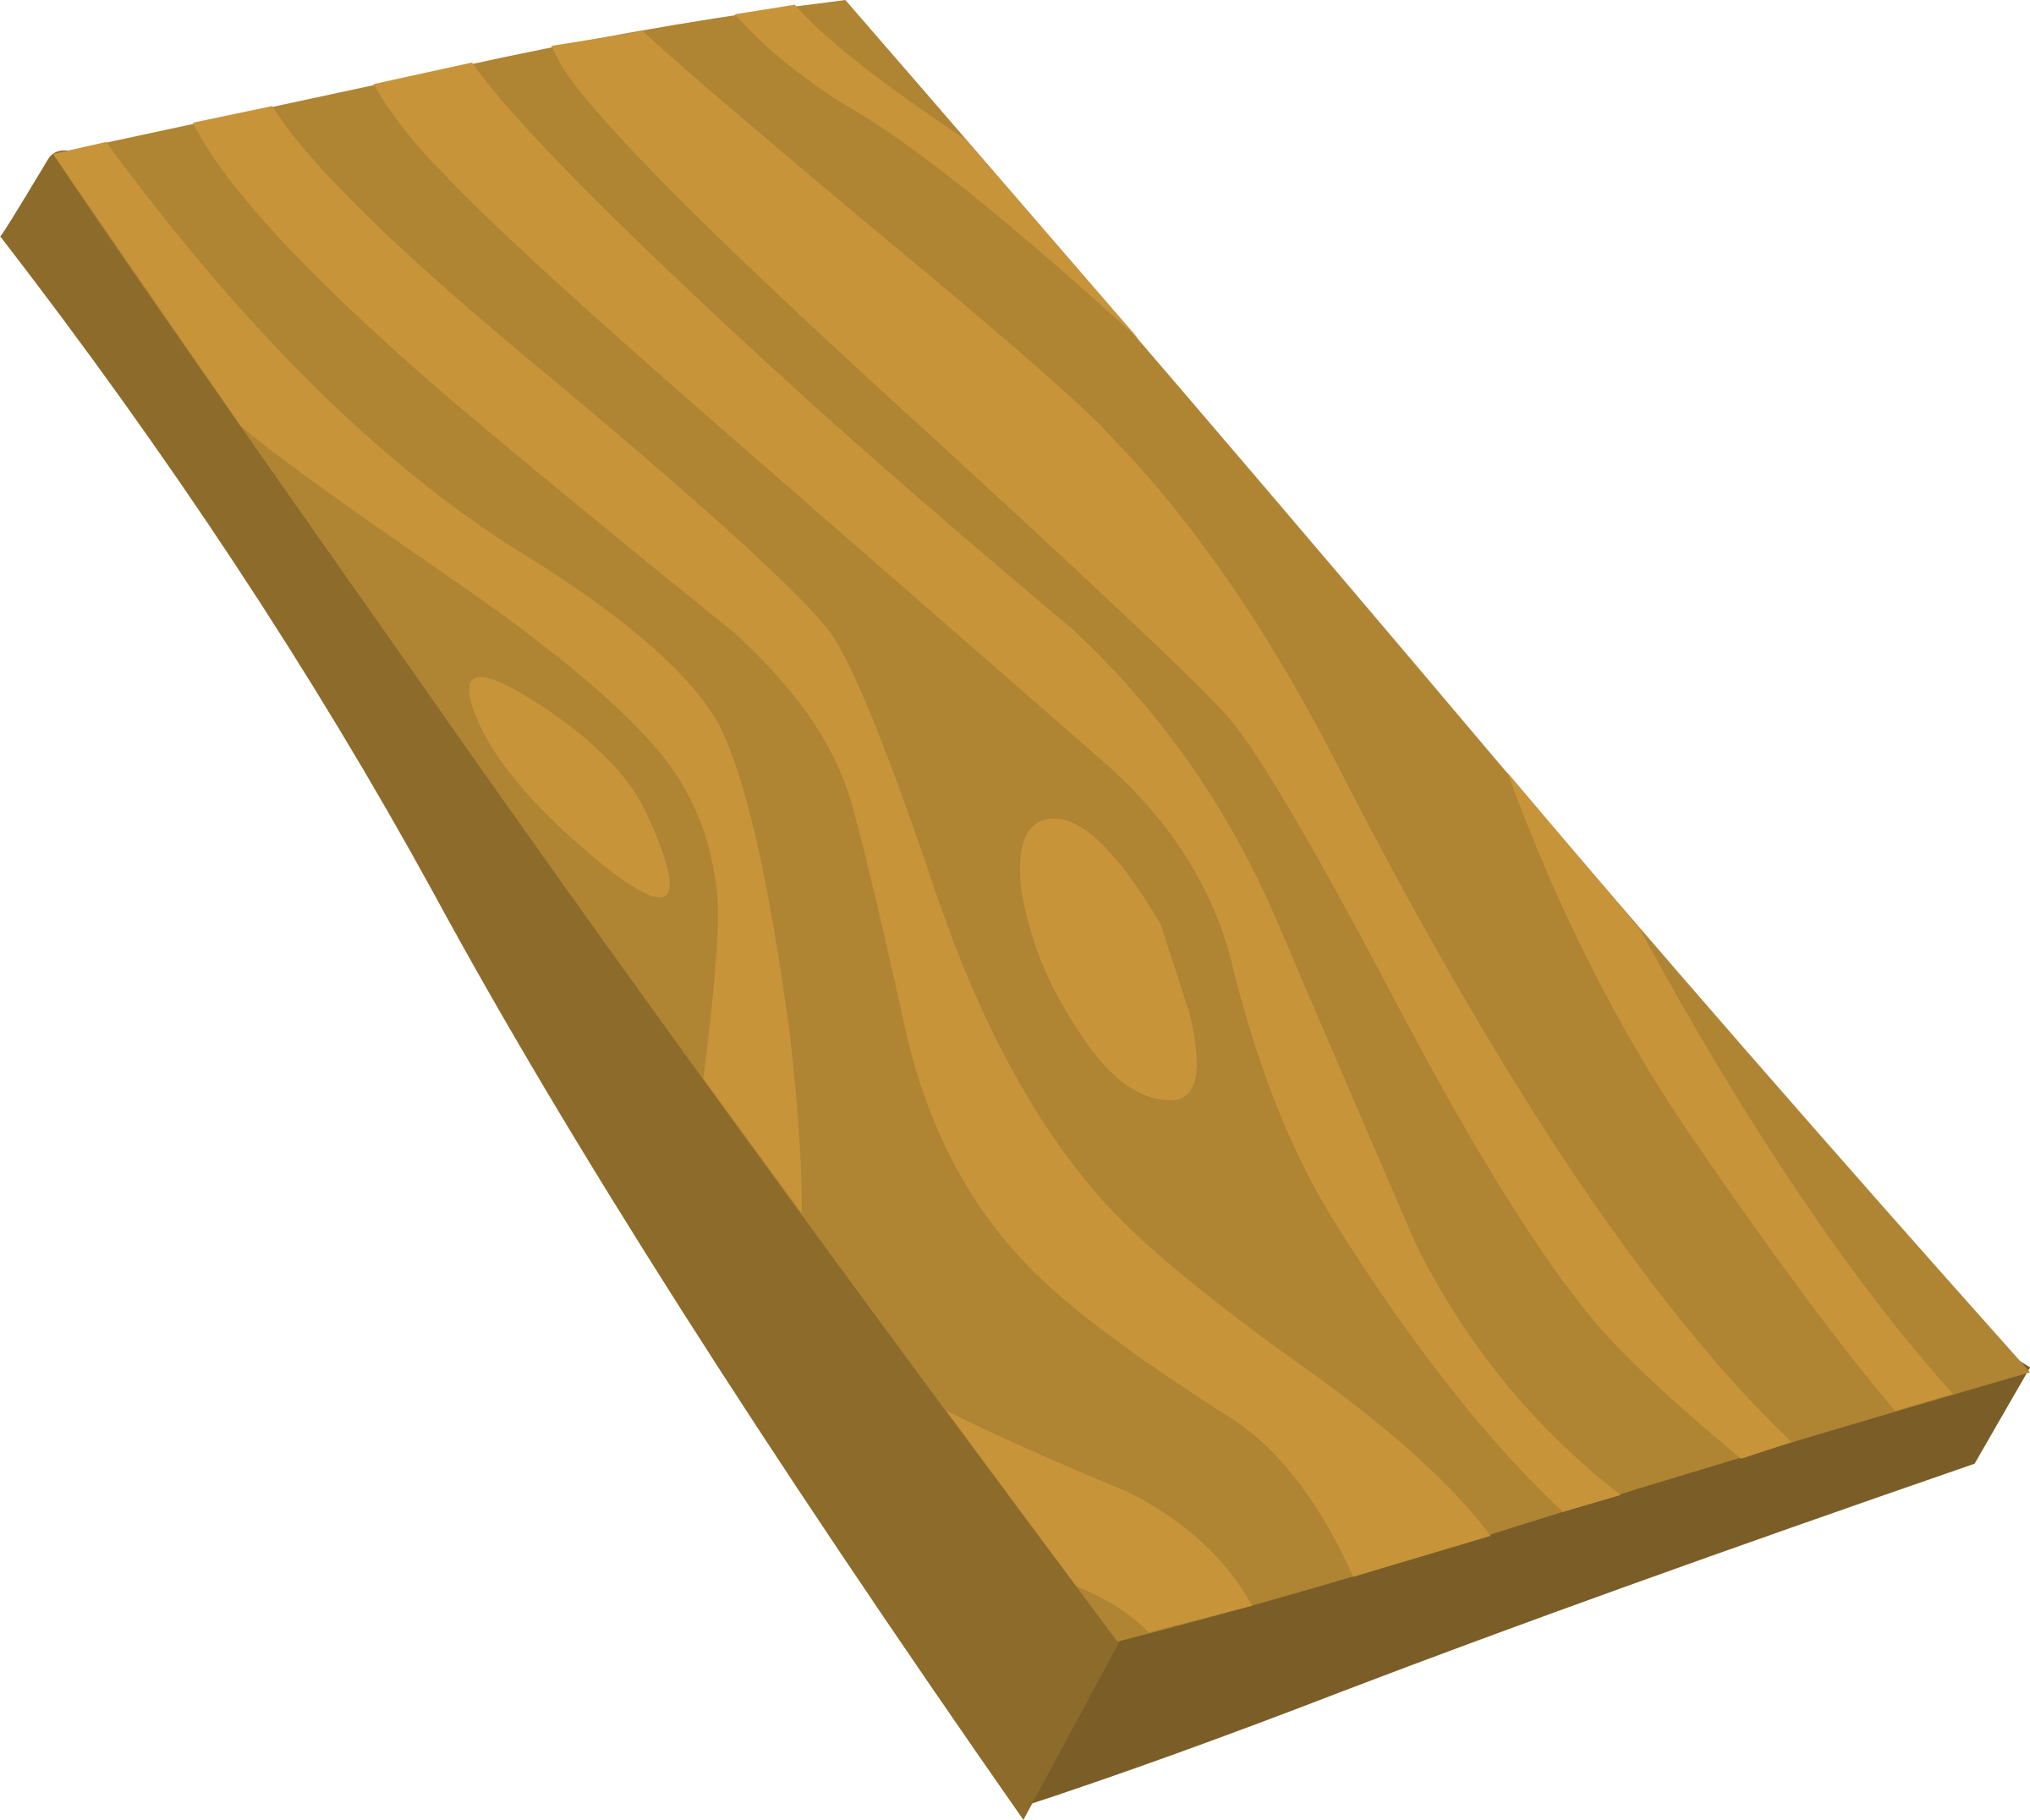 Wood plank clipart - ClipartF